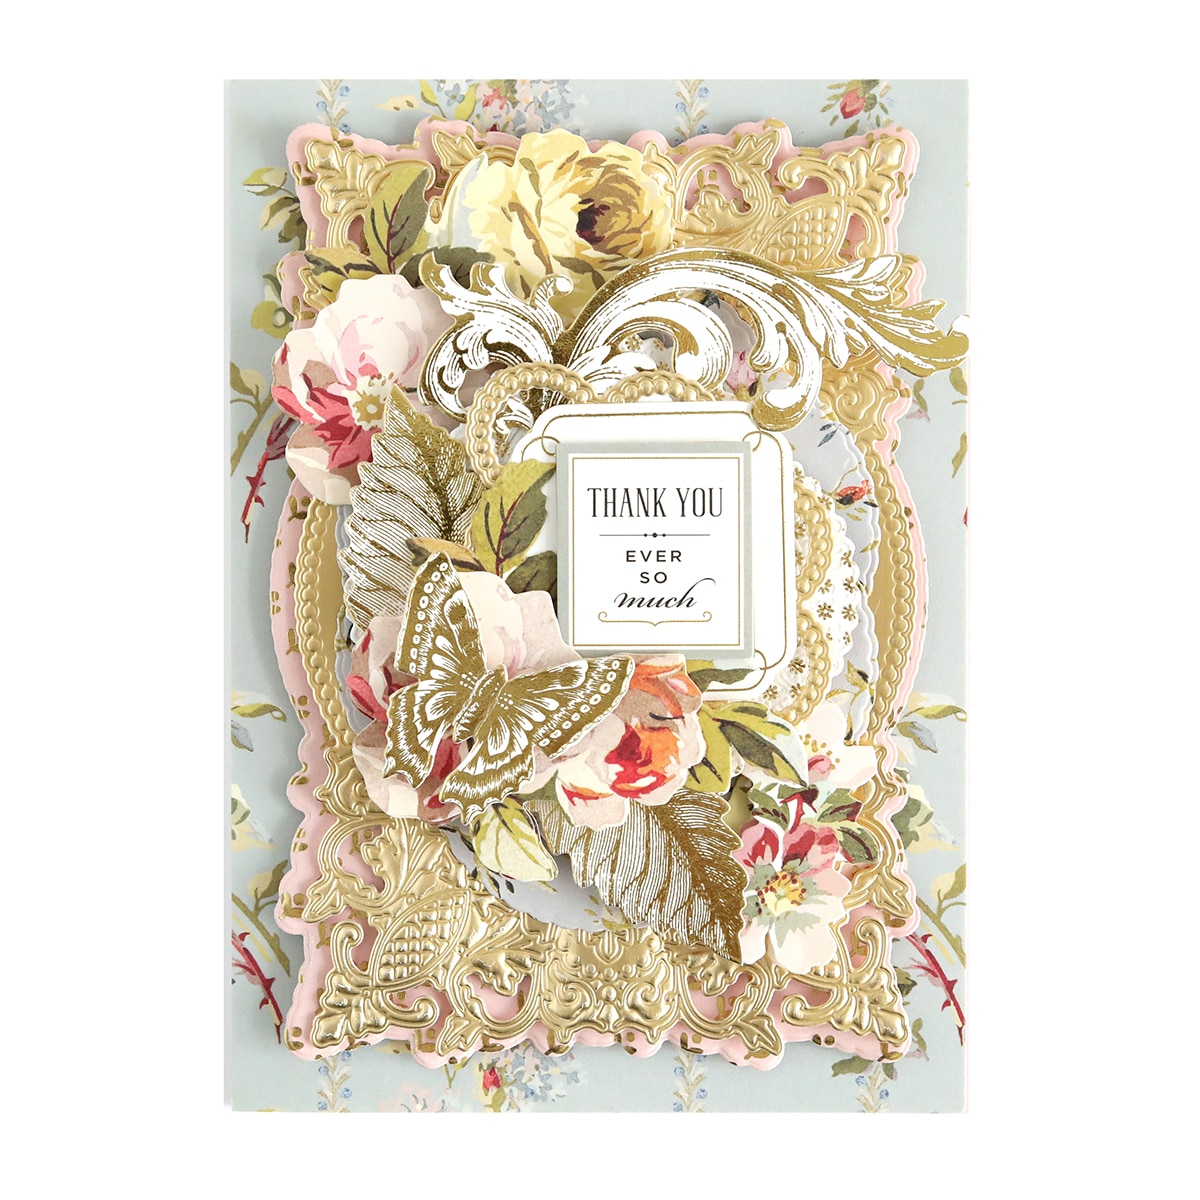 a thank you card with flowers and a frame.